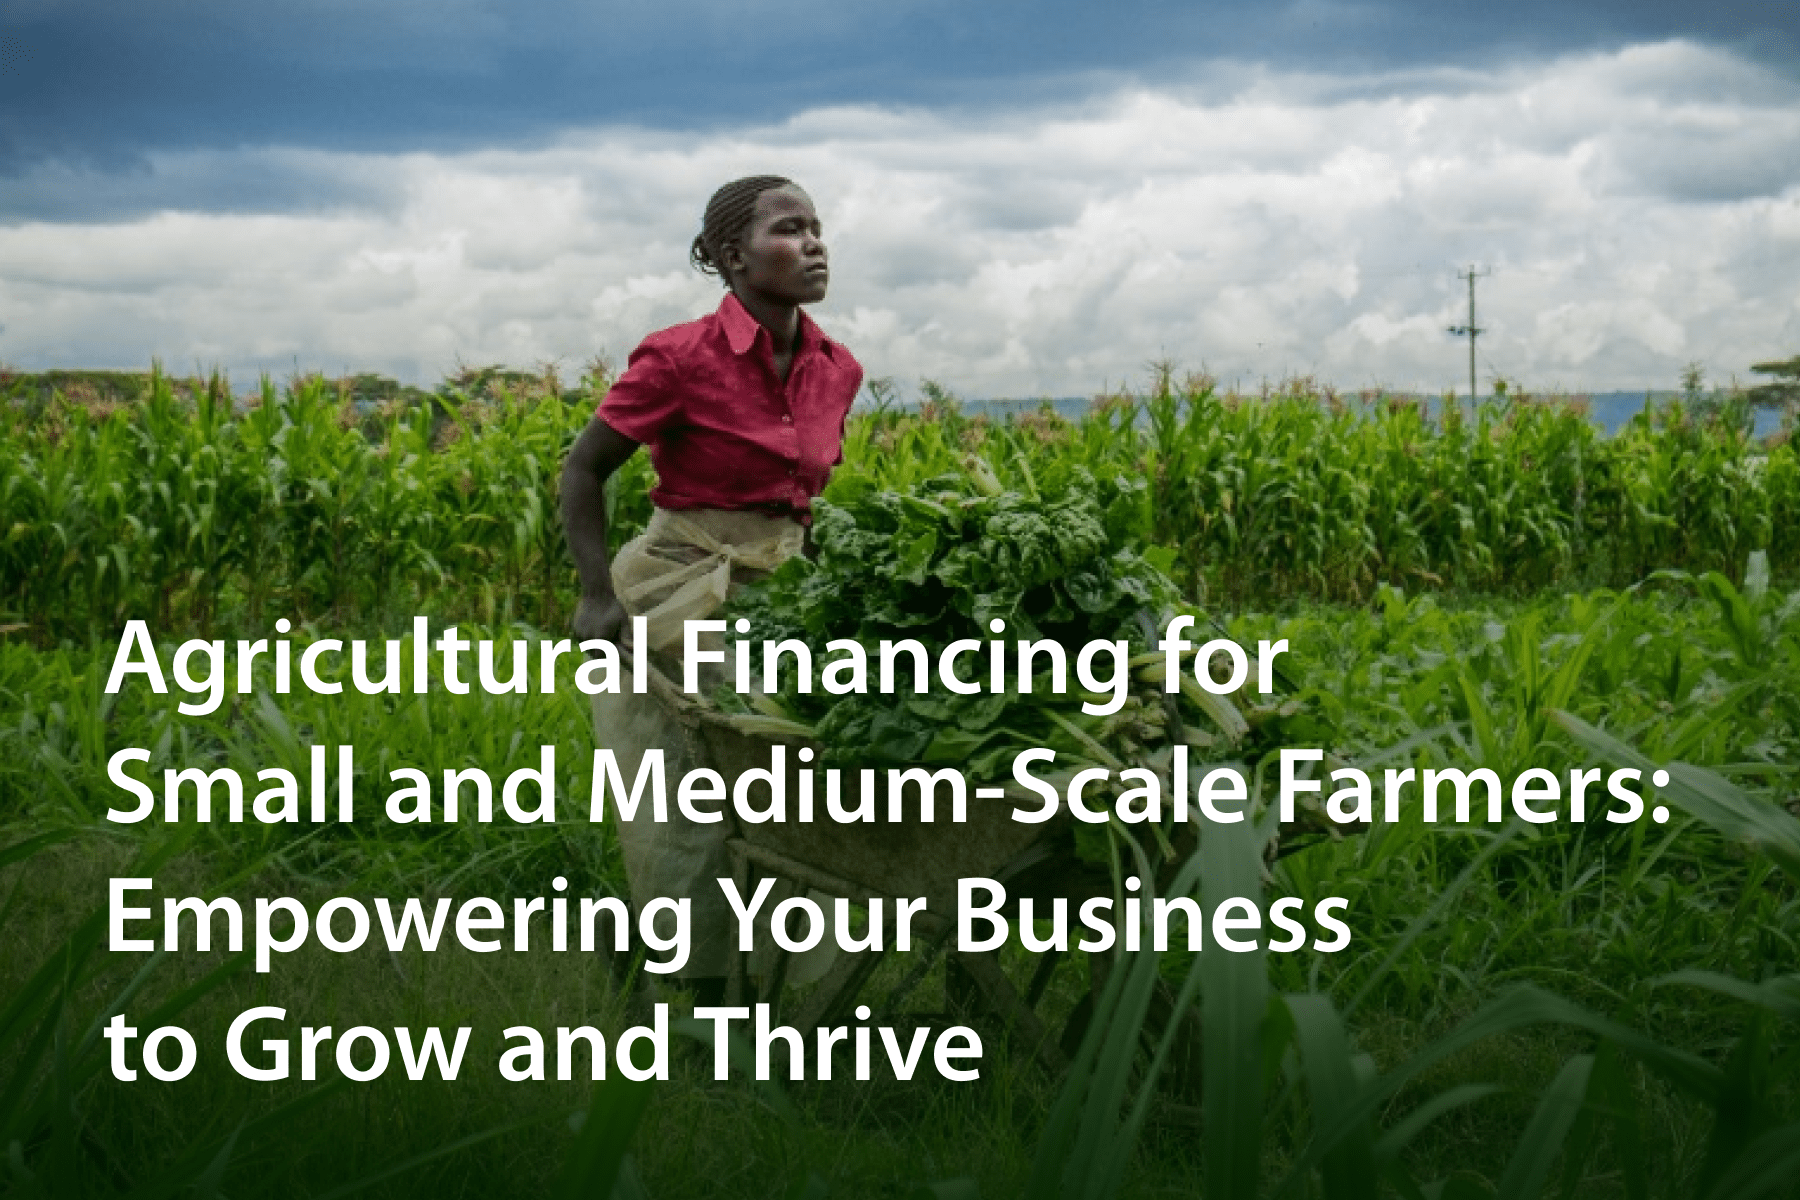 Agricultural Financing for Small and Medium-Scale Farmers (1)